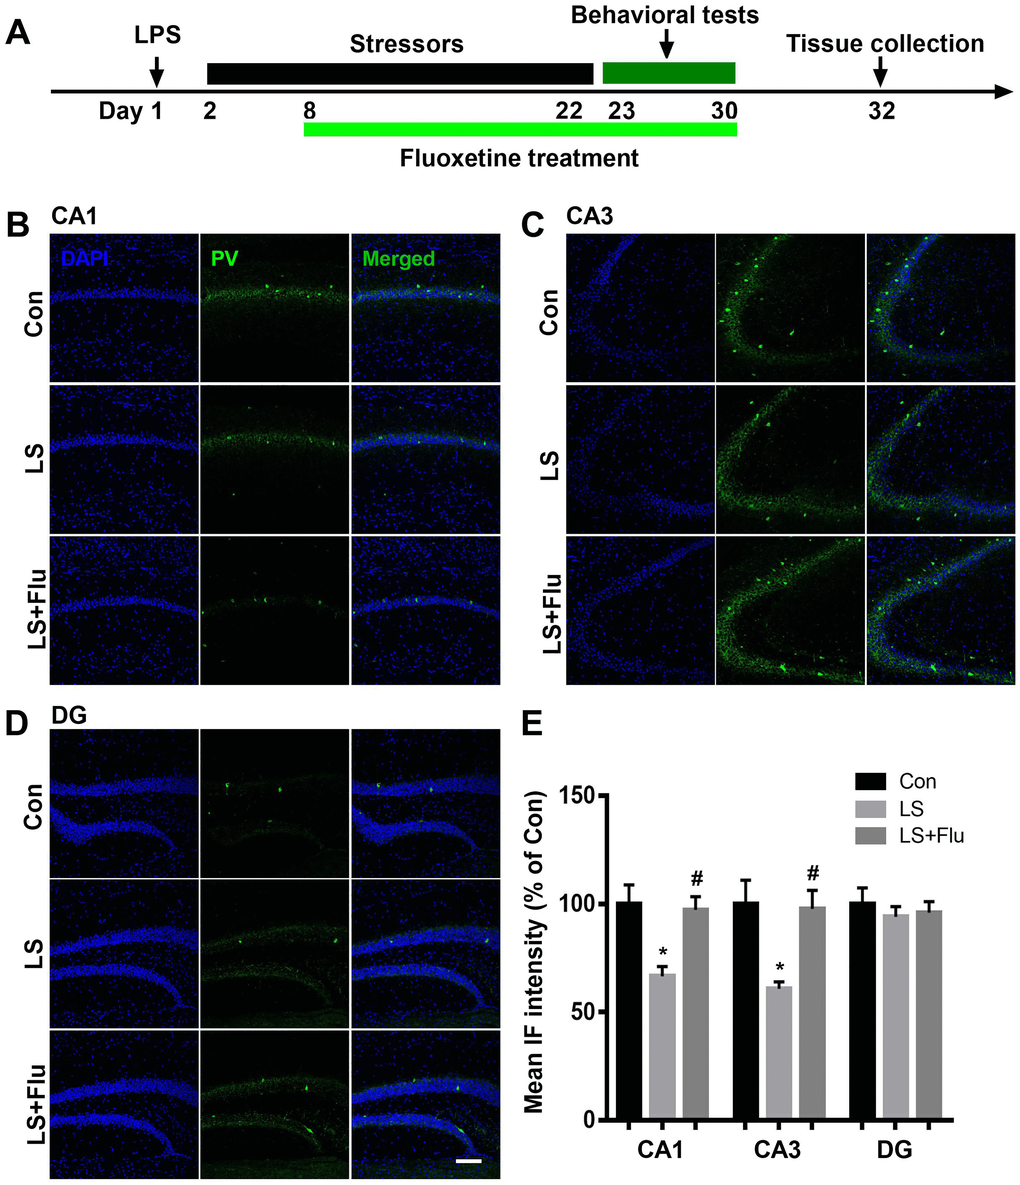 Fluoxetine treatment attenuated PV deficit after combined stress. (A) Schematic timeline of the experimental procedure. (B–D) Representative images of PV interneurons in all subregions of the hippocampus. (E) Quantification of mean PV immunofluorescence in the hippocampus. Data are shown as mean ± SEM (n = 4), *P #P r = 100 μm. Con, control; LPS, lipopolysaccharide; Flu, fluoxetine; IF, immunofluorescence; LS, LPS + stress.